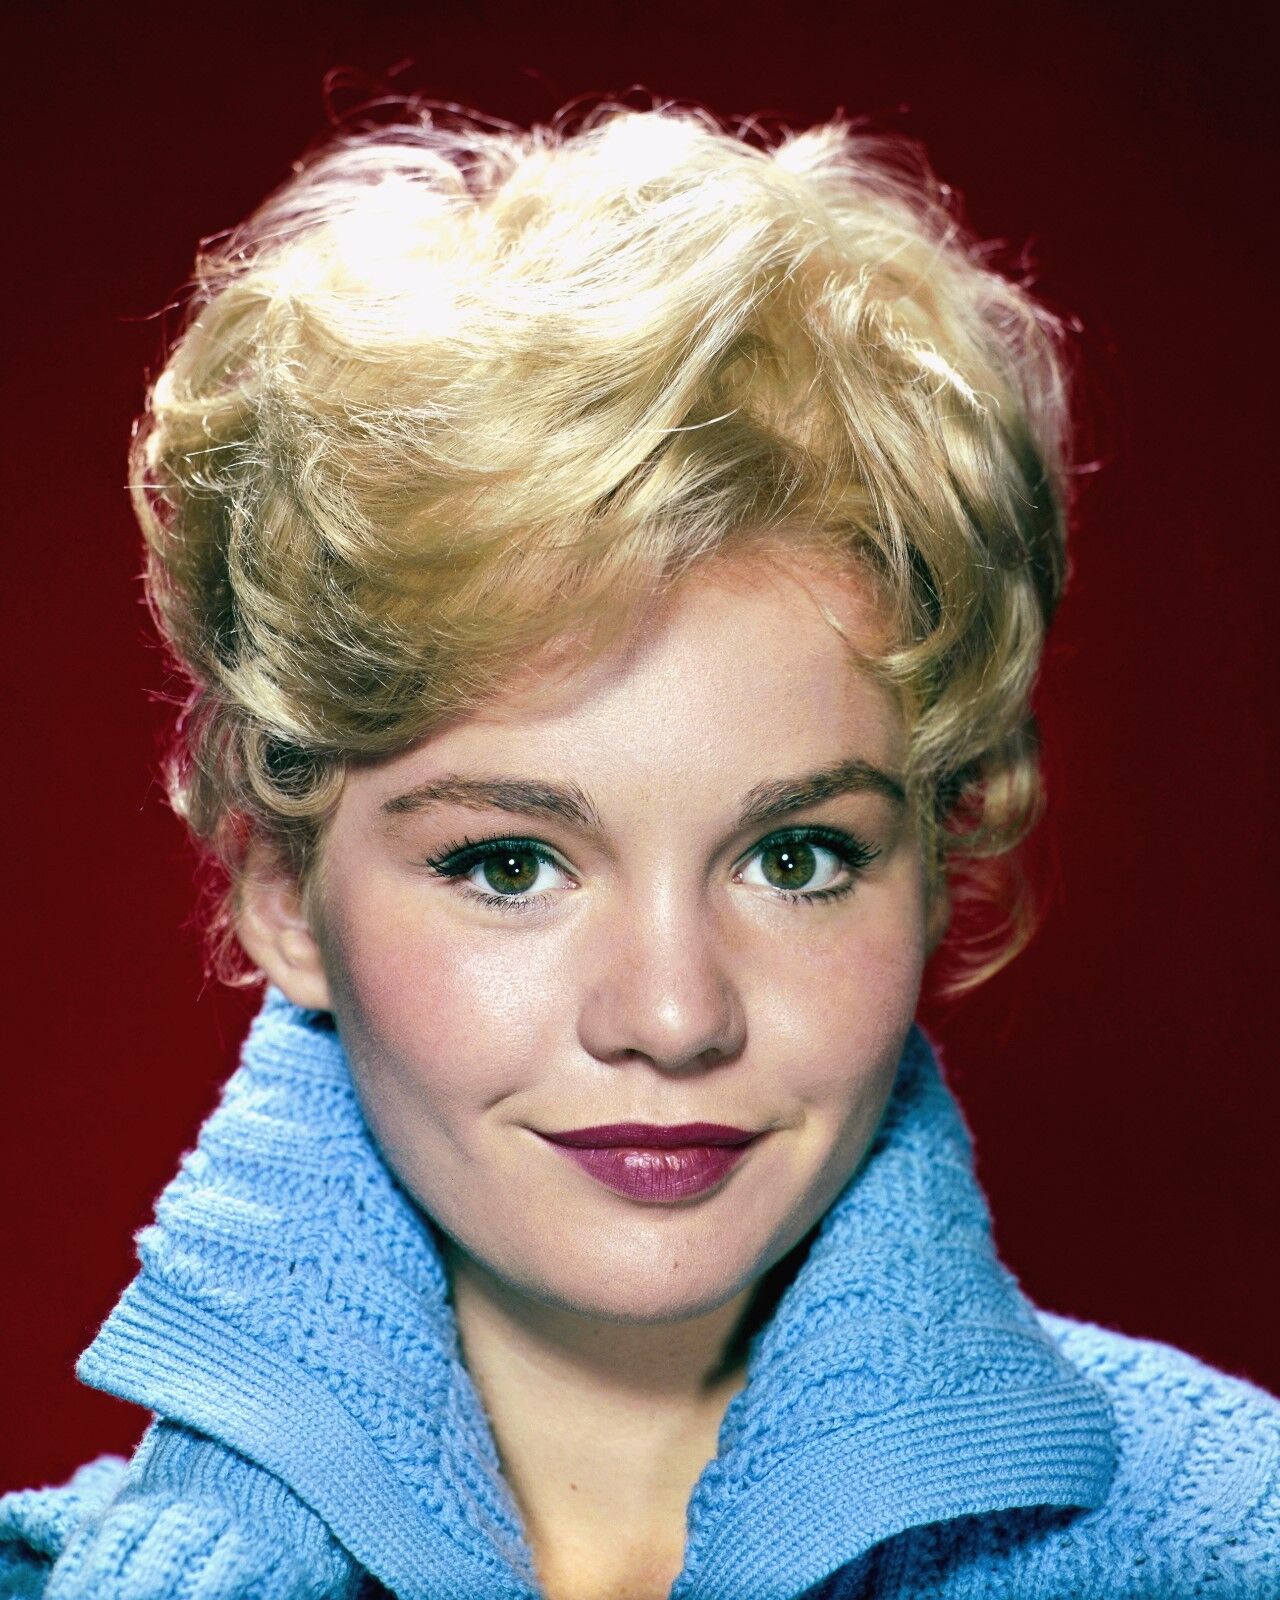 ACTRESS TUESDAY WELD - 8X10 PUBLICITY PHOTO (AB-232)